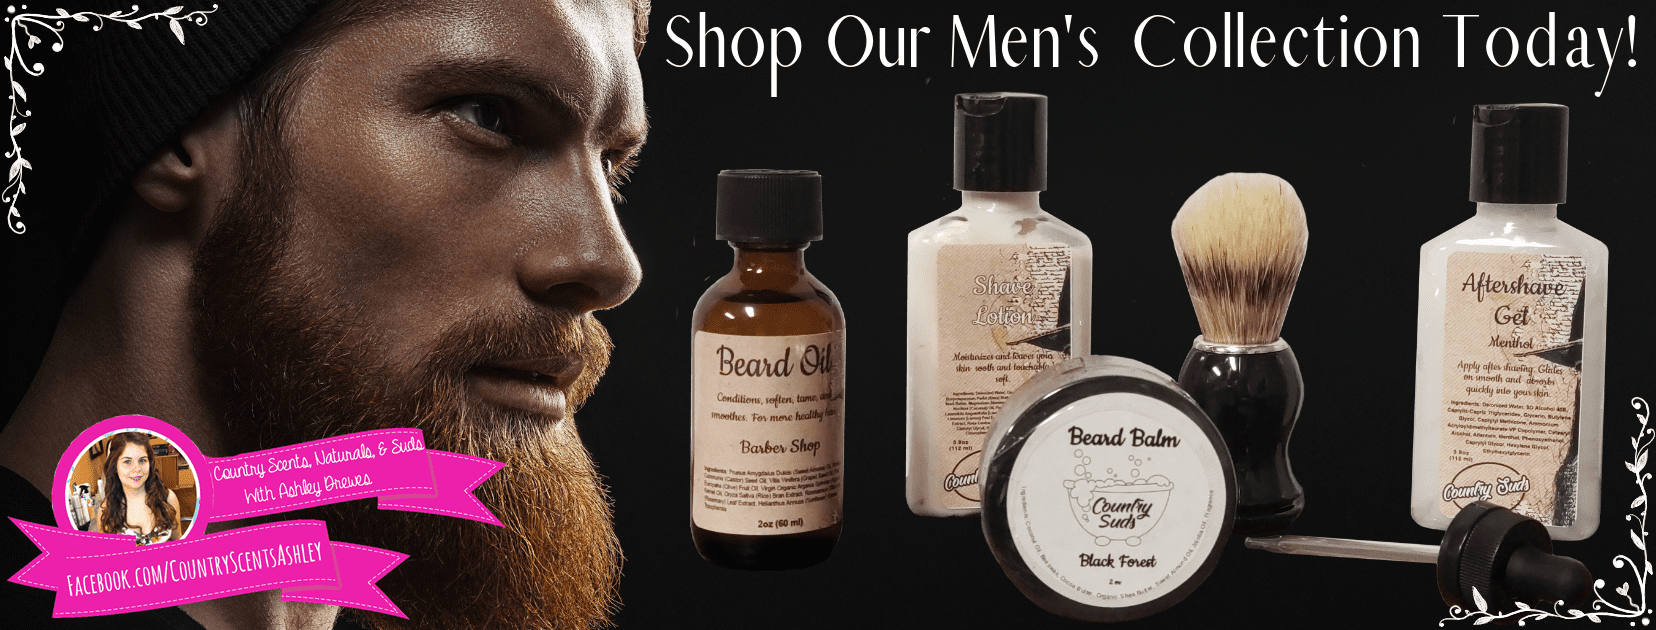 Country Suds Mens Collection